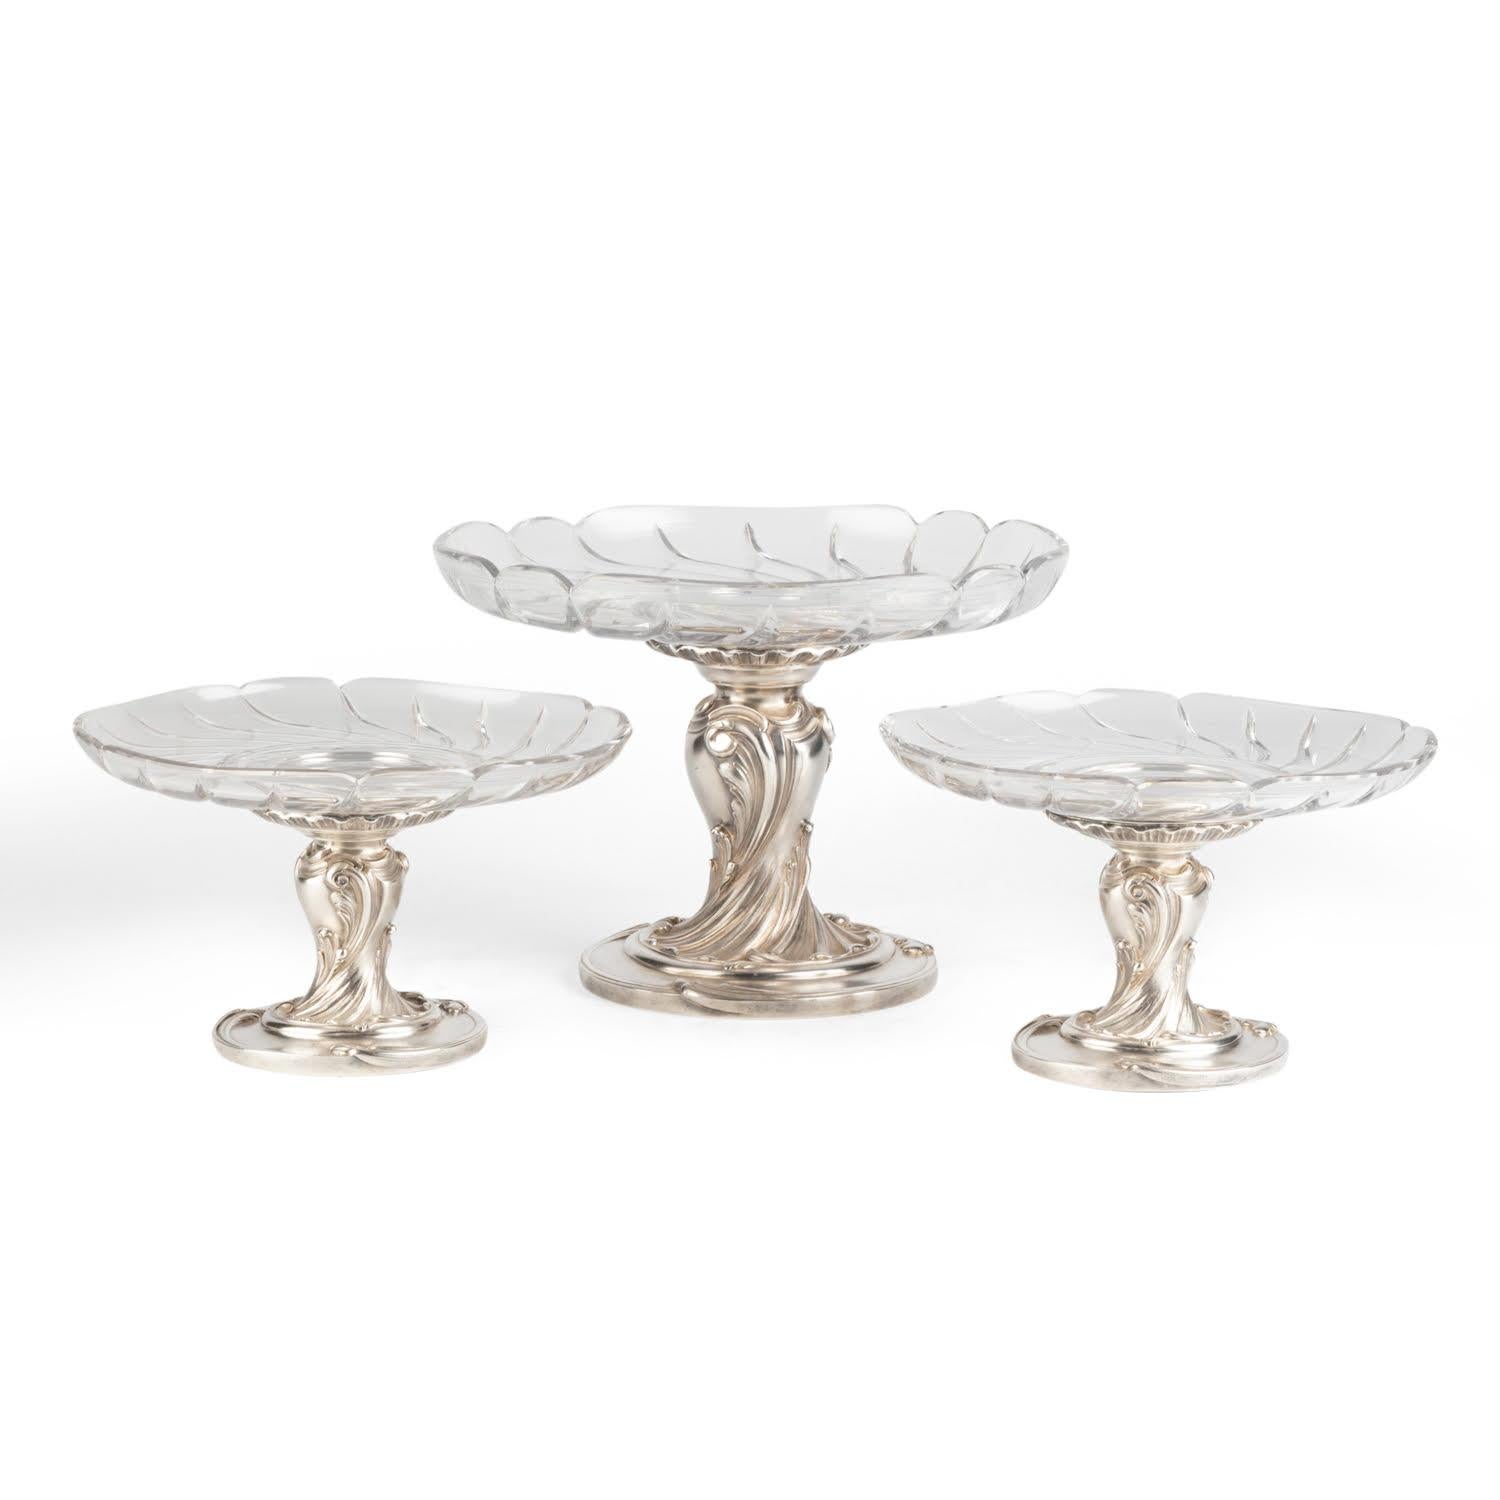 Set of three Christofle cake stands, Napoleon III period.

Three silver-plated and cut-glass cake stands by the Maison Christofle, 19th century, Napoleon III period.    
Large bowl: h: 19cm, d: 27cm
Small bowl: h: 13.5cm, d: 21.5cm